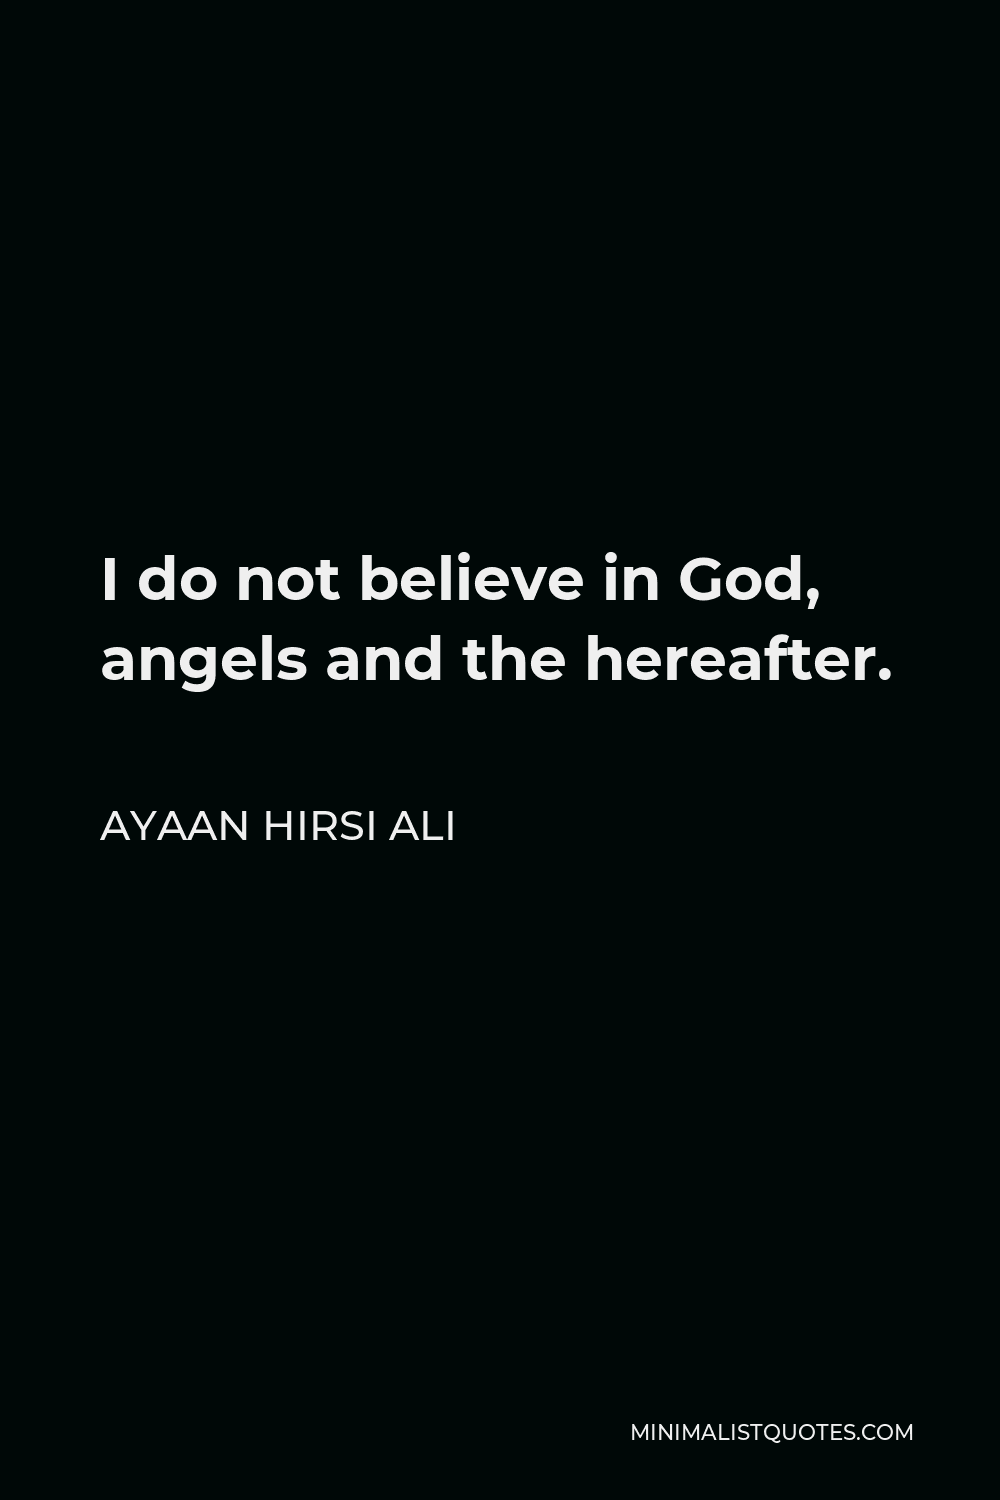 Ayaan Hirsi Ali Quote - I do not believe in God, angels and the hereafter.